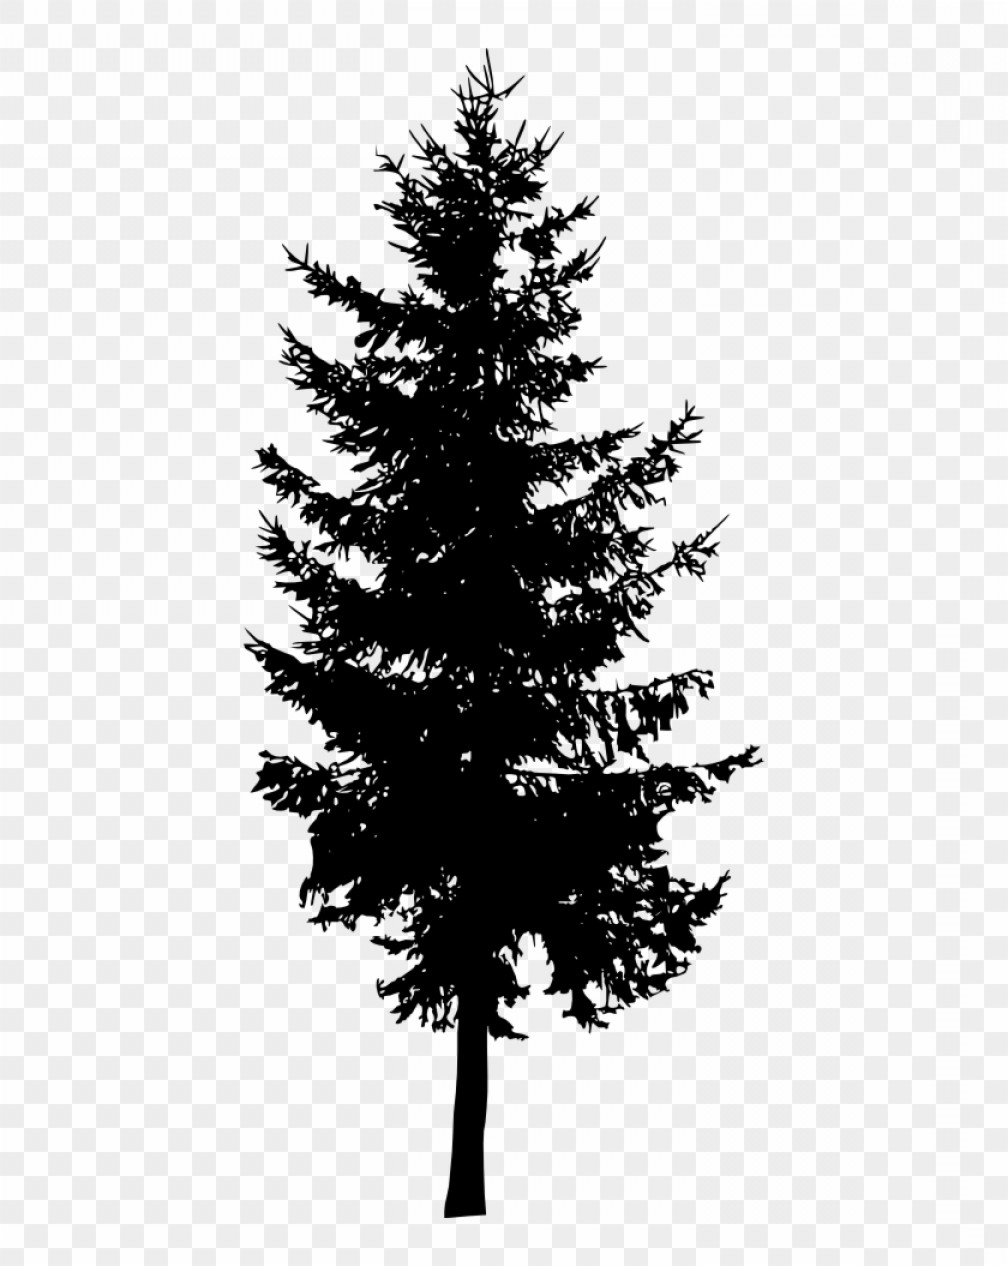 Evergreen Tree Silhouette Vector at Vectorified.com | Collection of